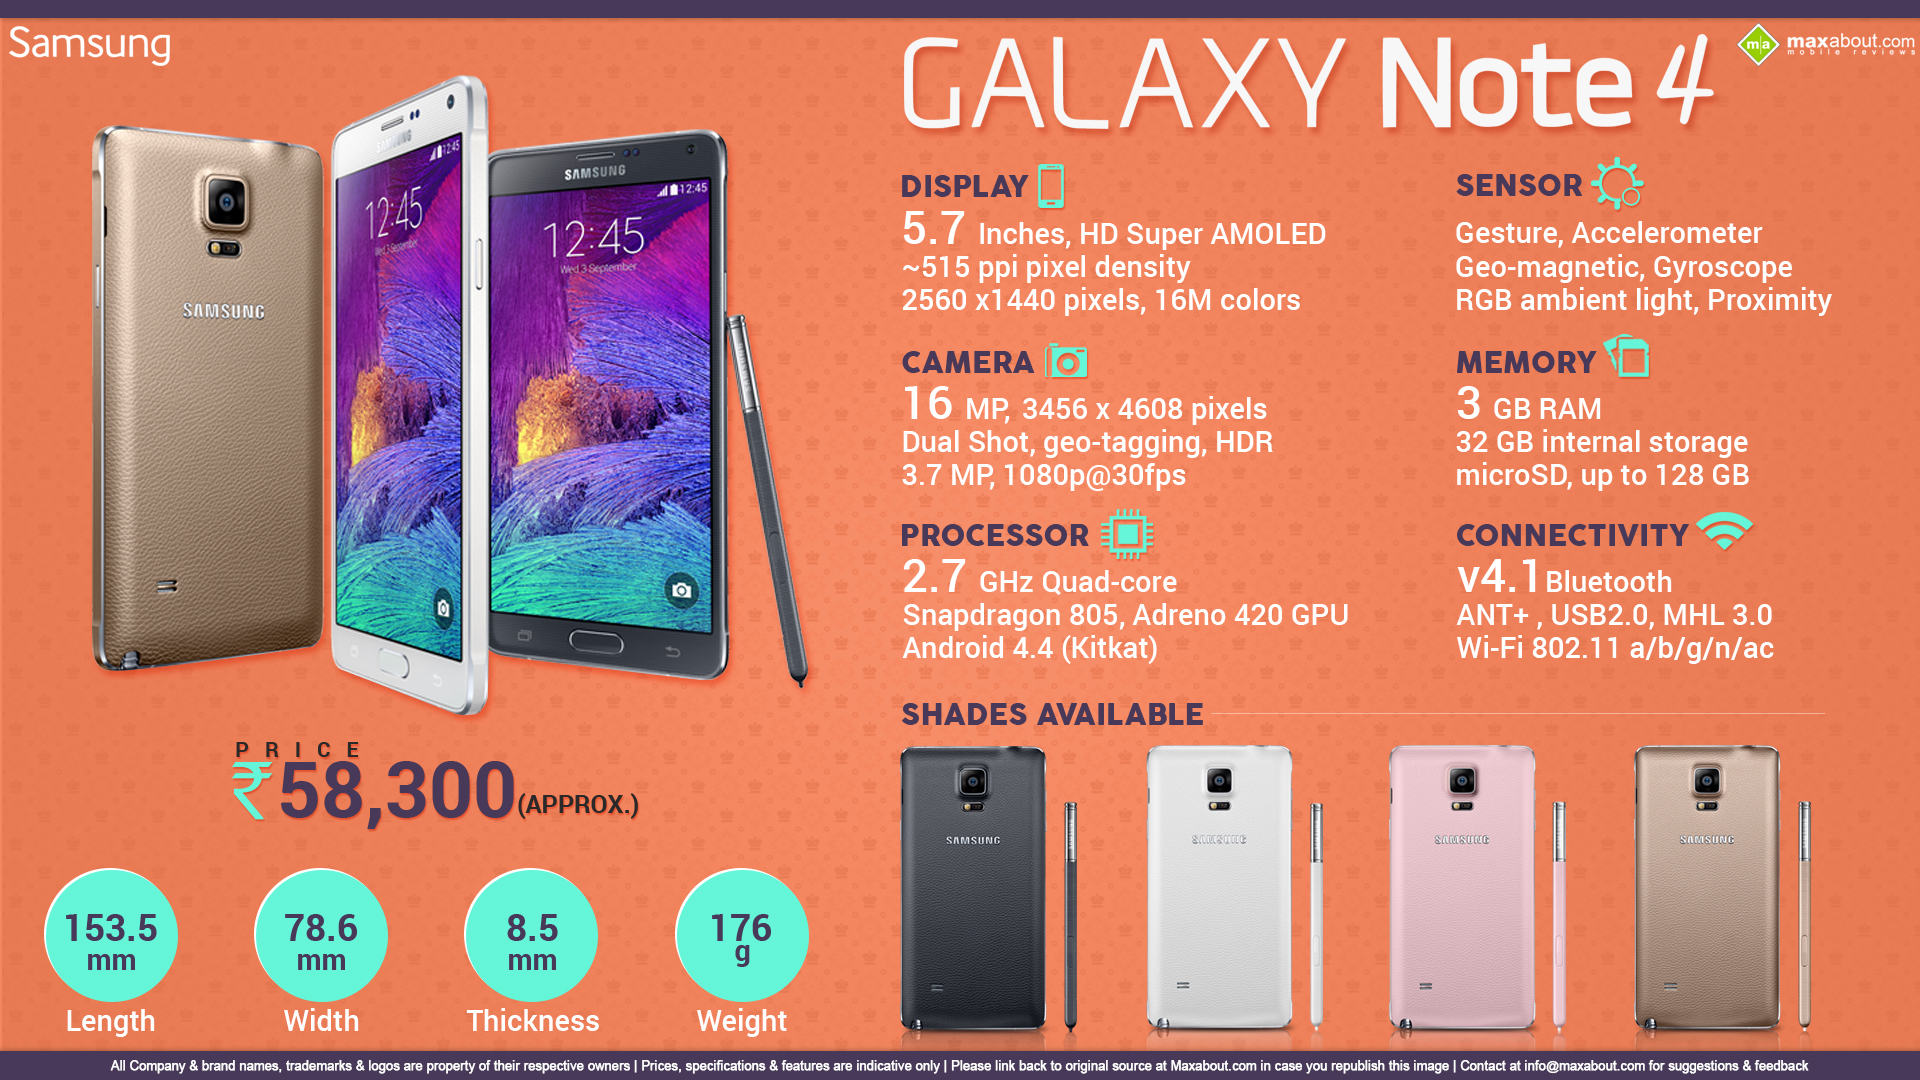 Quick Facts About Samsung Galaxy Note 4